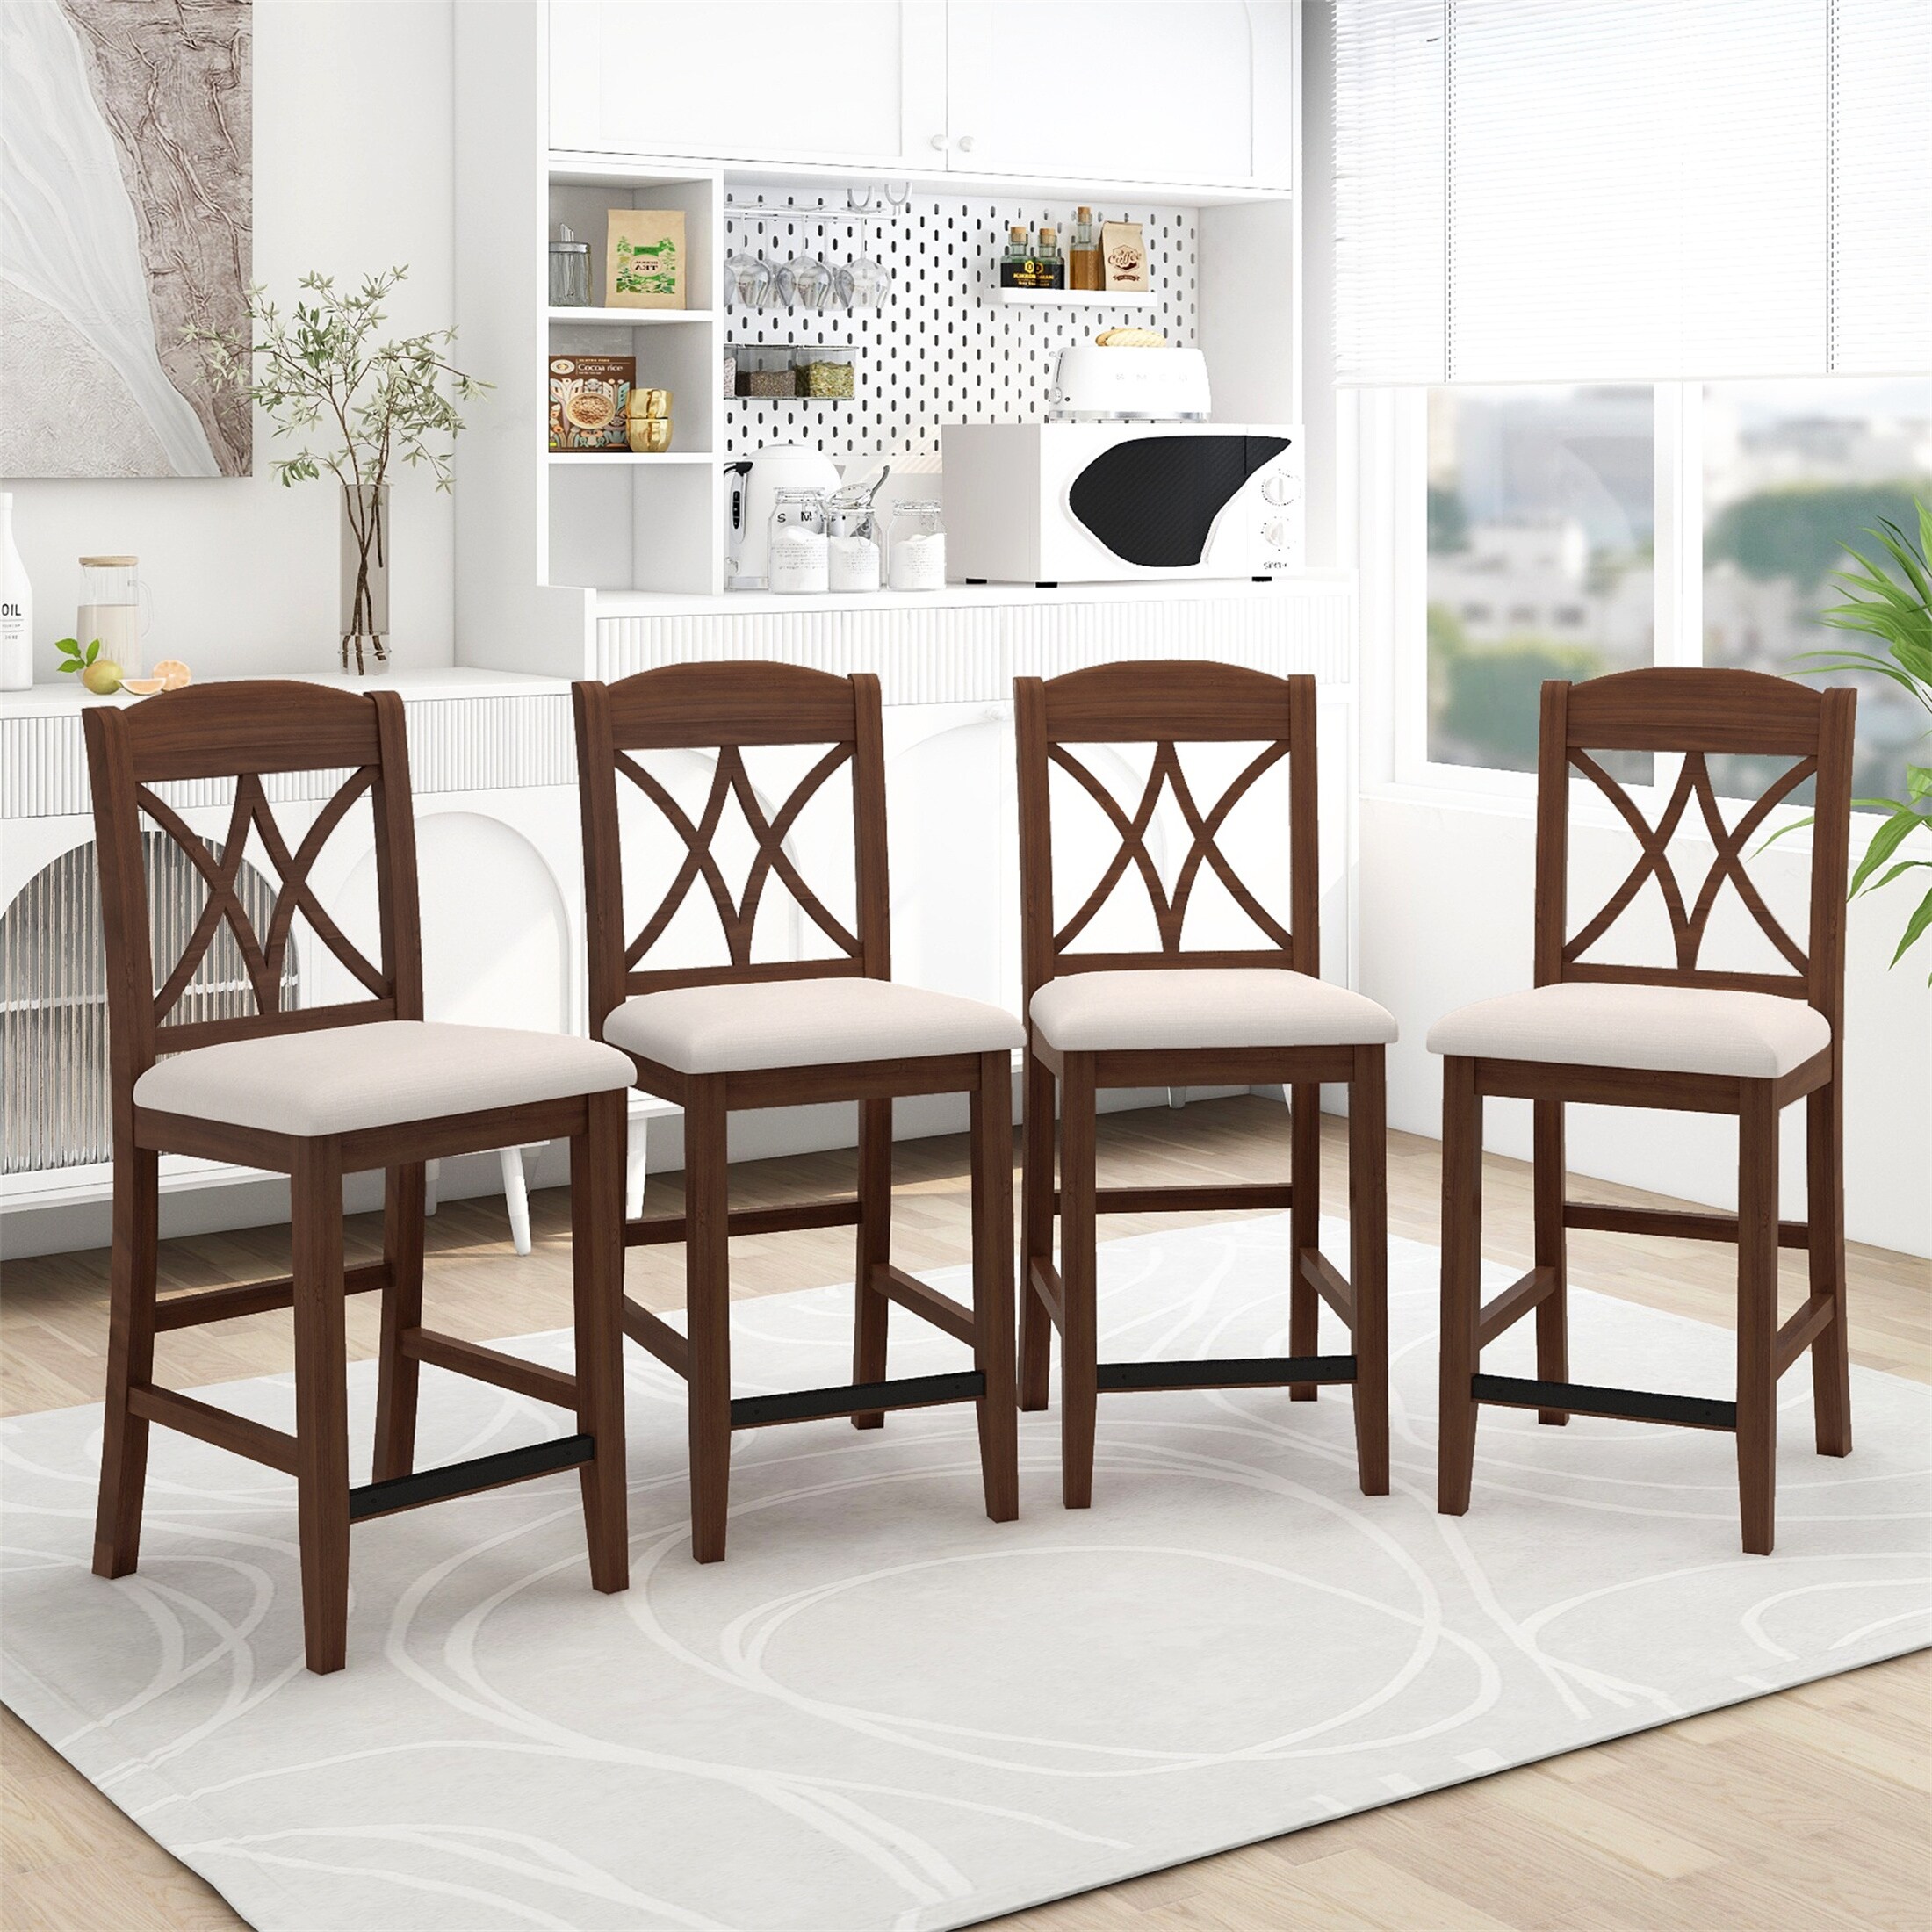 Casual Counter Height Wood Upholstered Dining Chairs (Set of 4) - Walnut